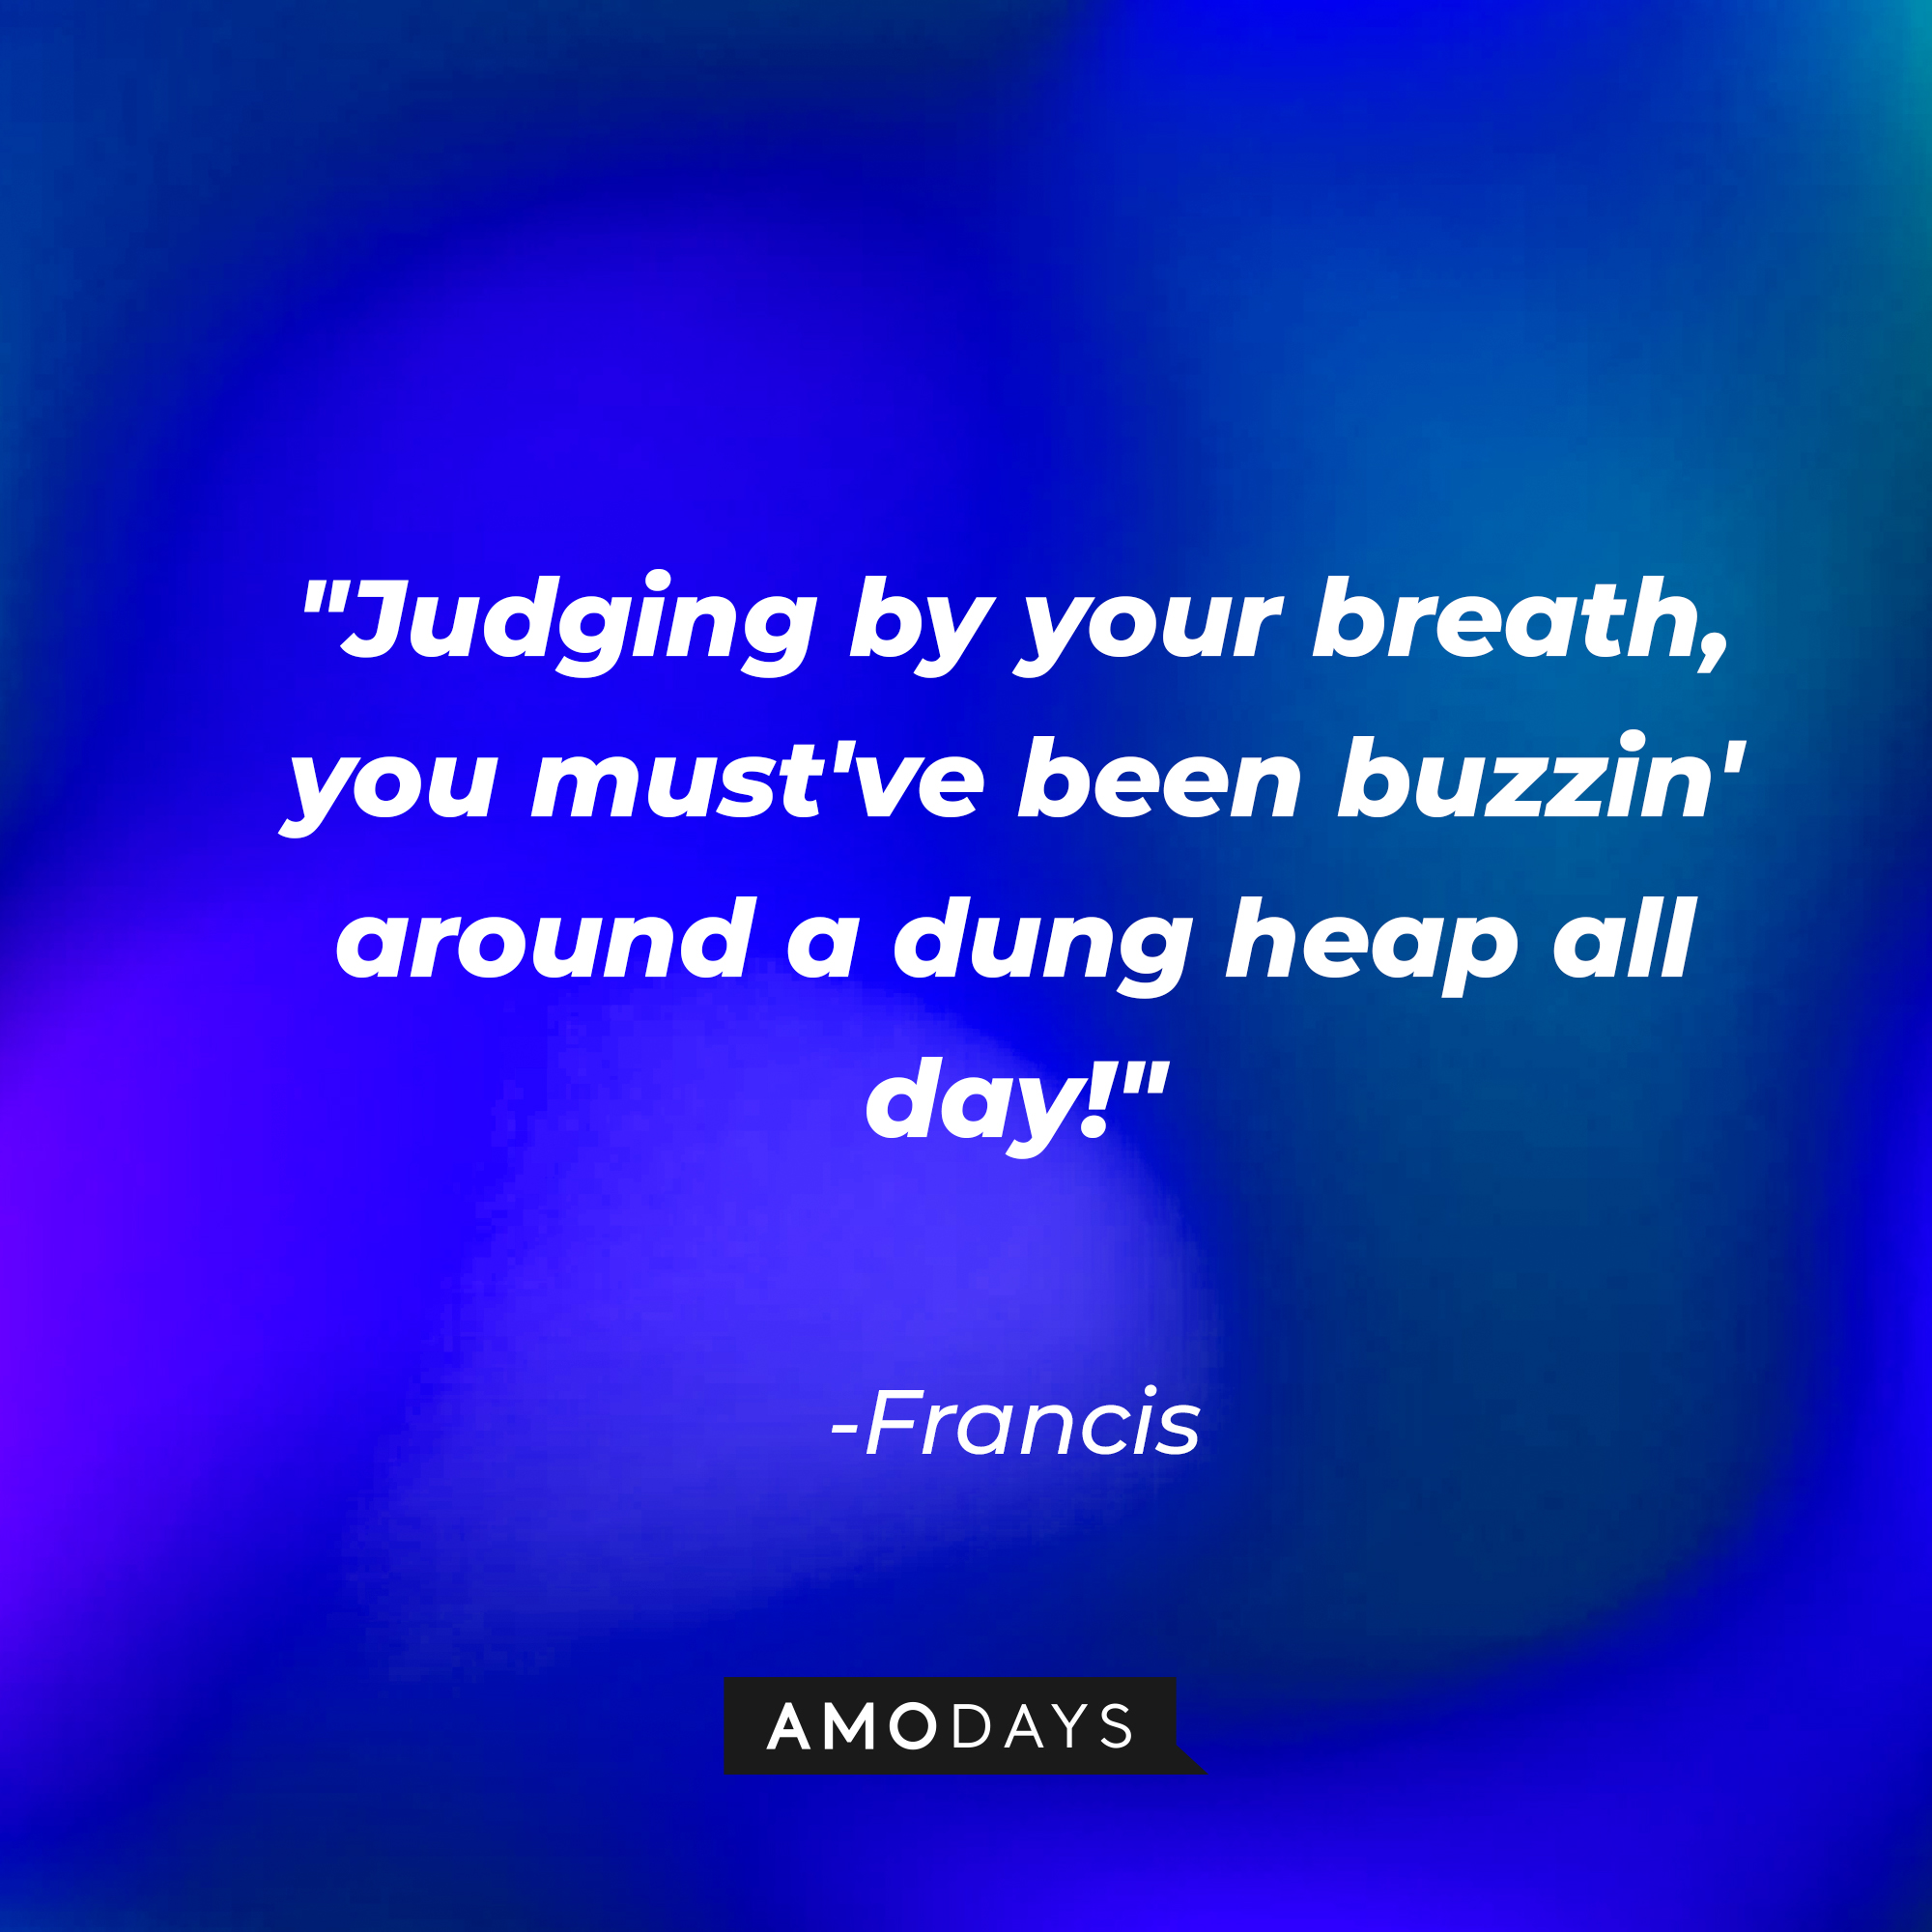 Francis's quote: "Judging by your breath, you must've been buzzin' around a dung heap all day!" | Source: AmoDays